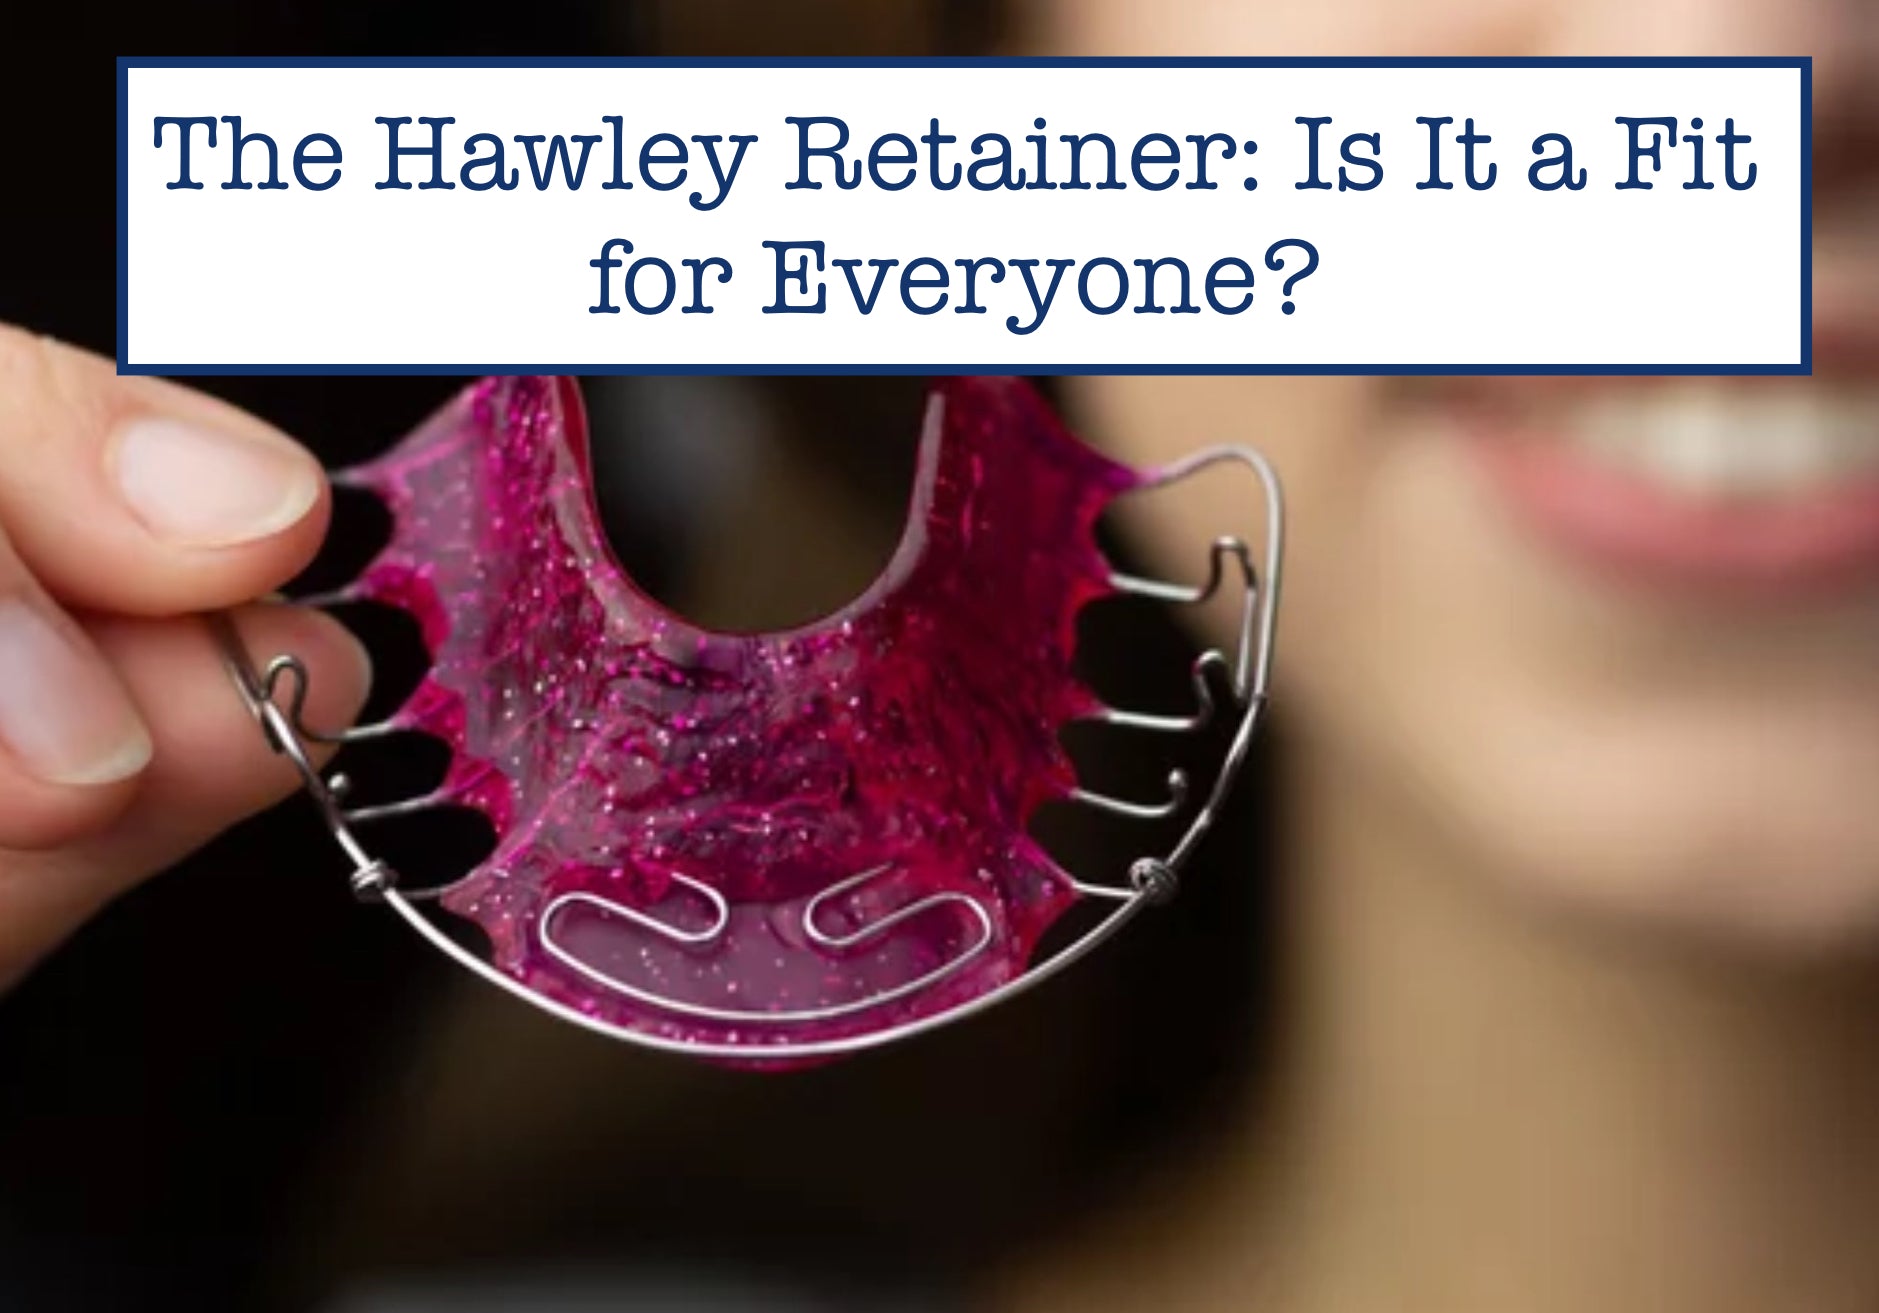 The Hawley Retainer: Is It a Fit for Everyone?